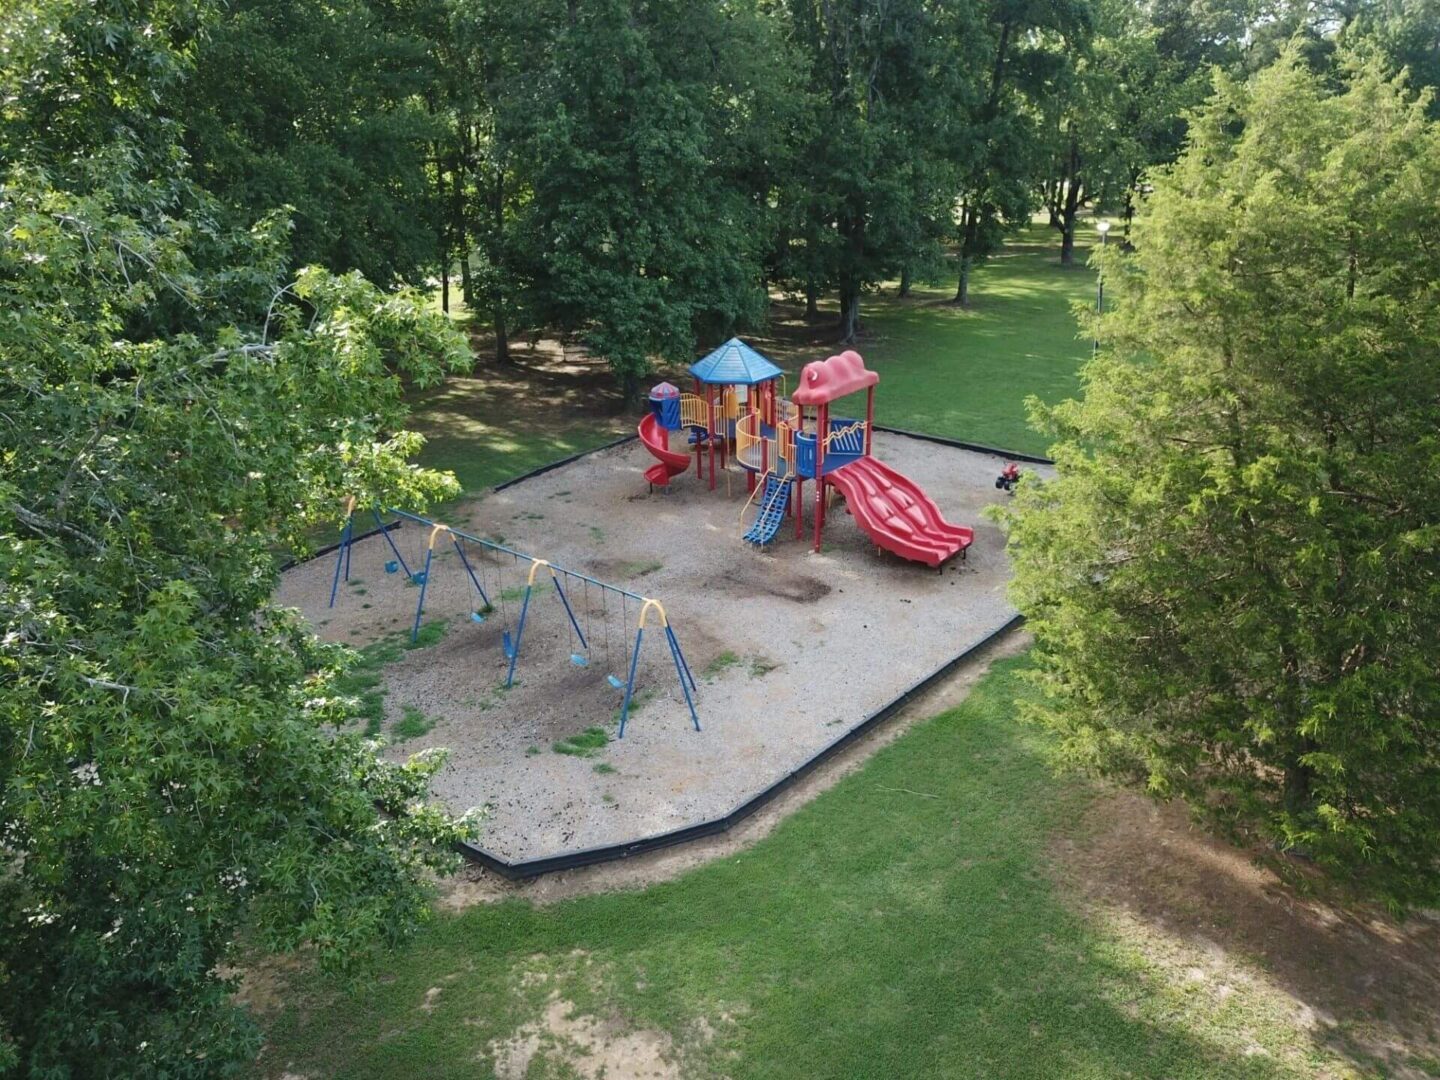 A playground with trees and grass in the background.